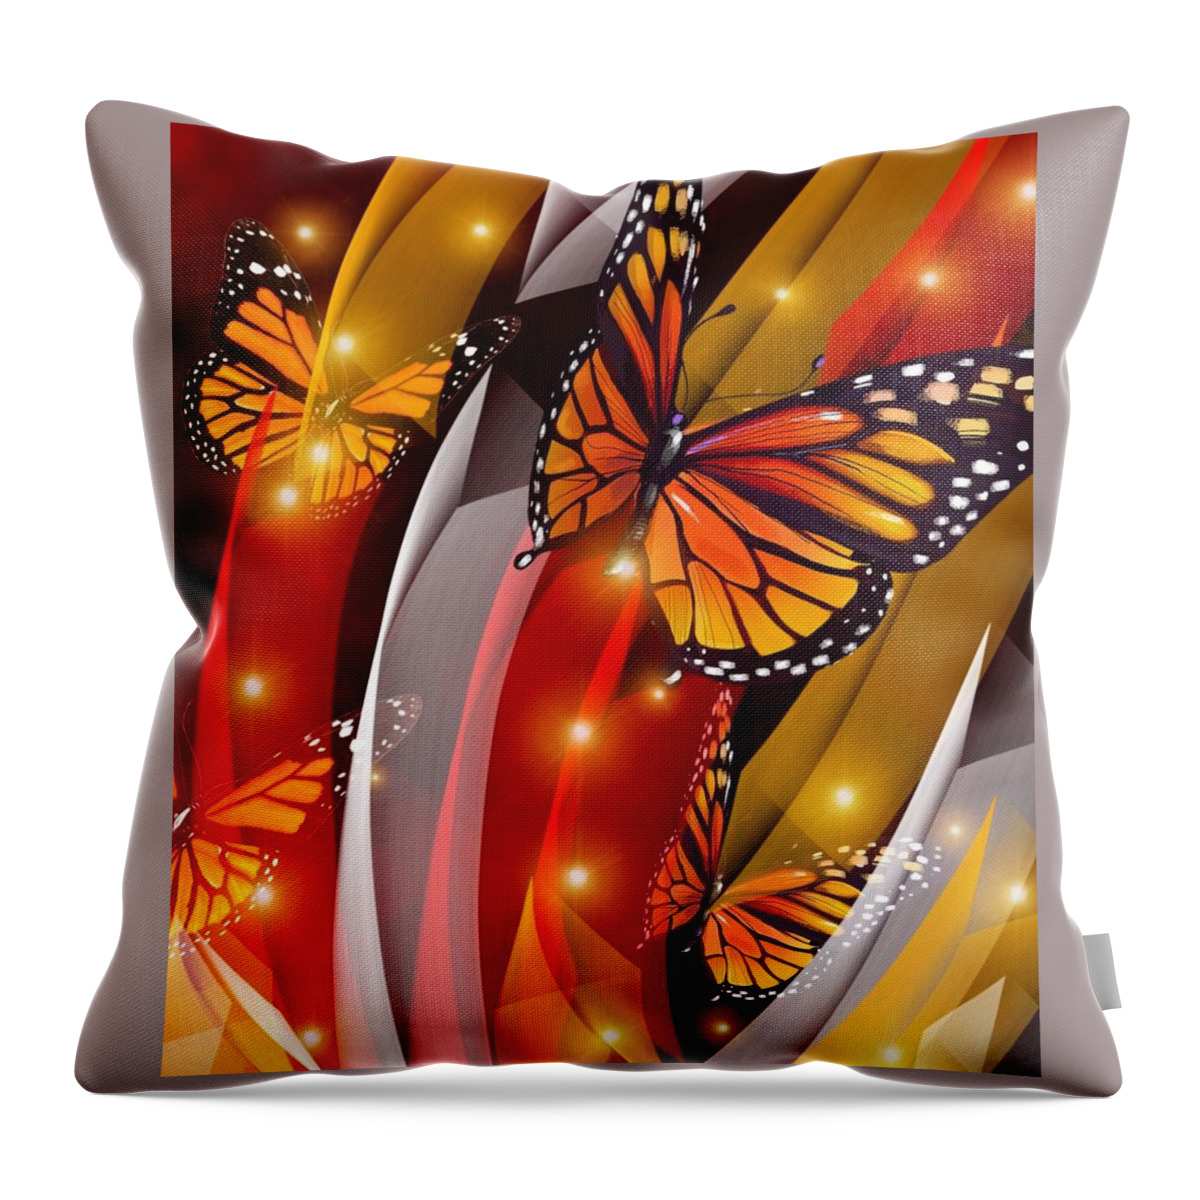 Insects Butterflies Nature Throw Pillow featuring the digital art Follow the lights by Gayle Price Thomas